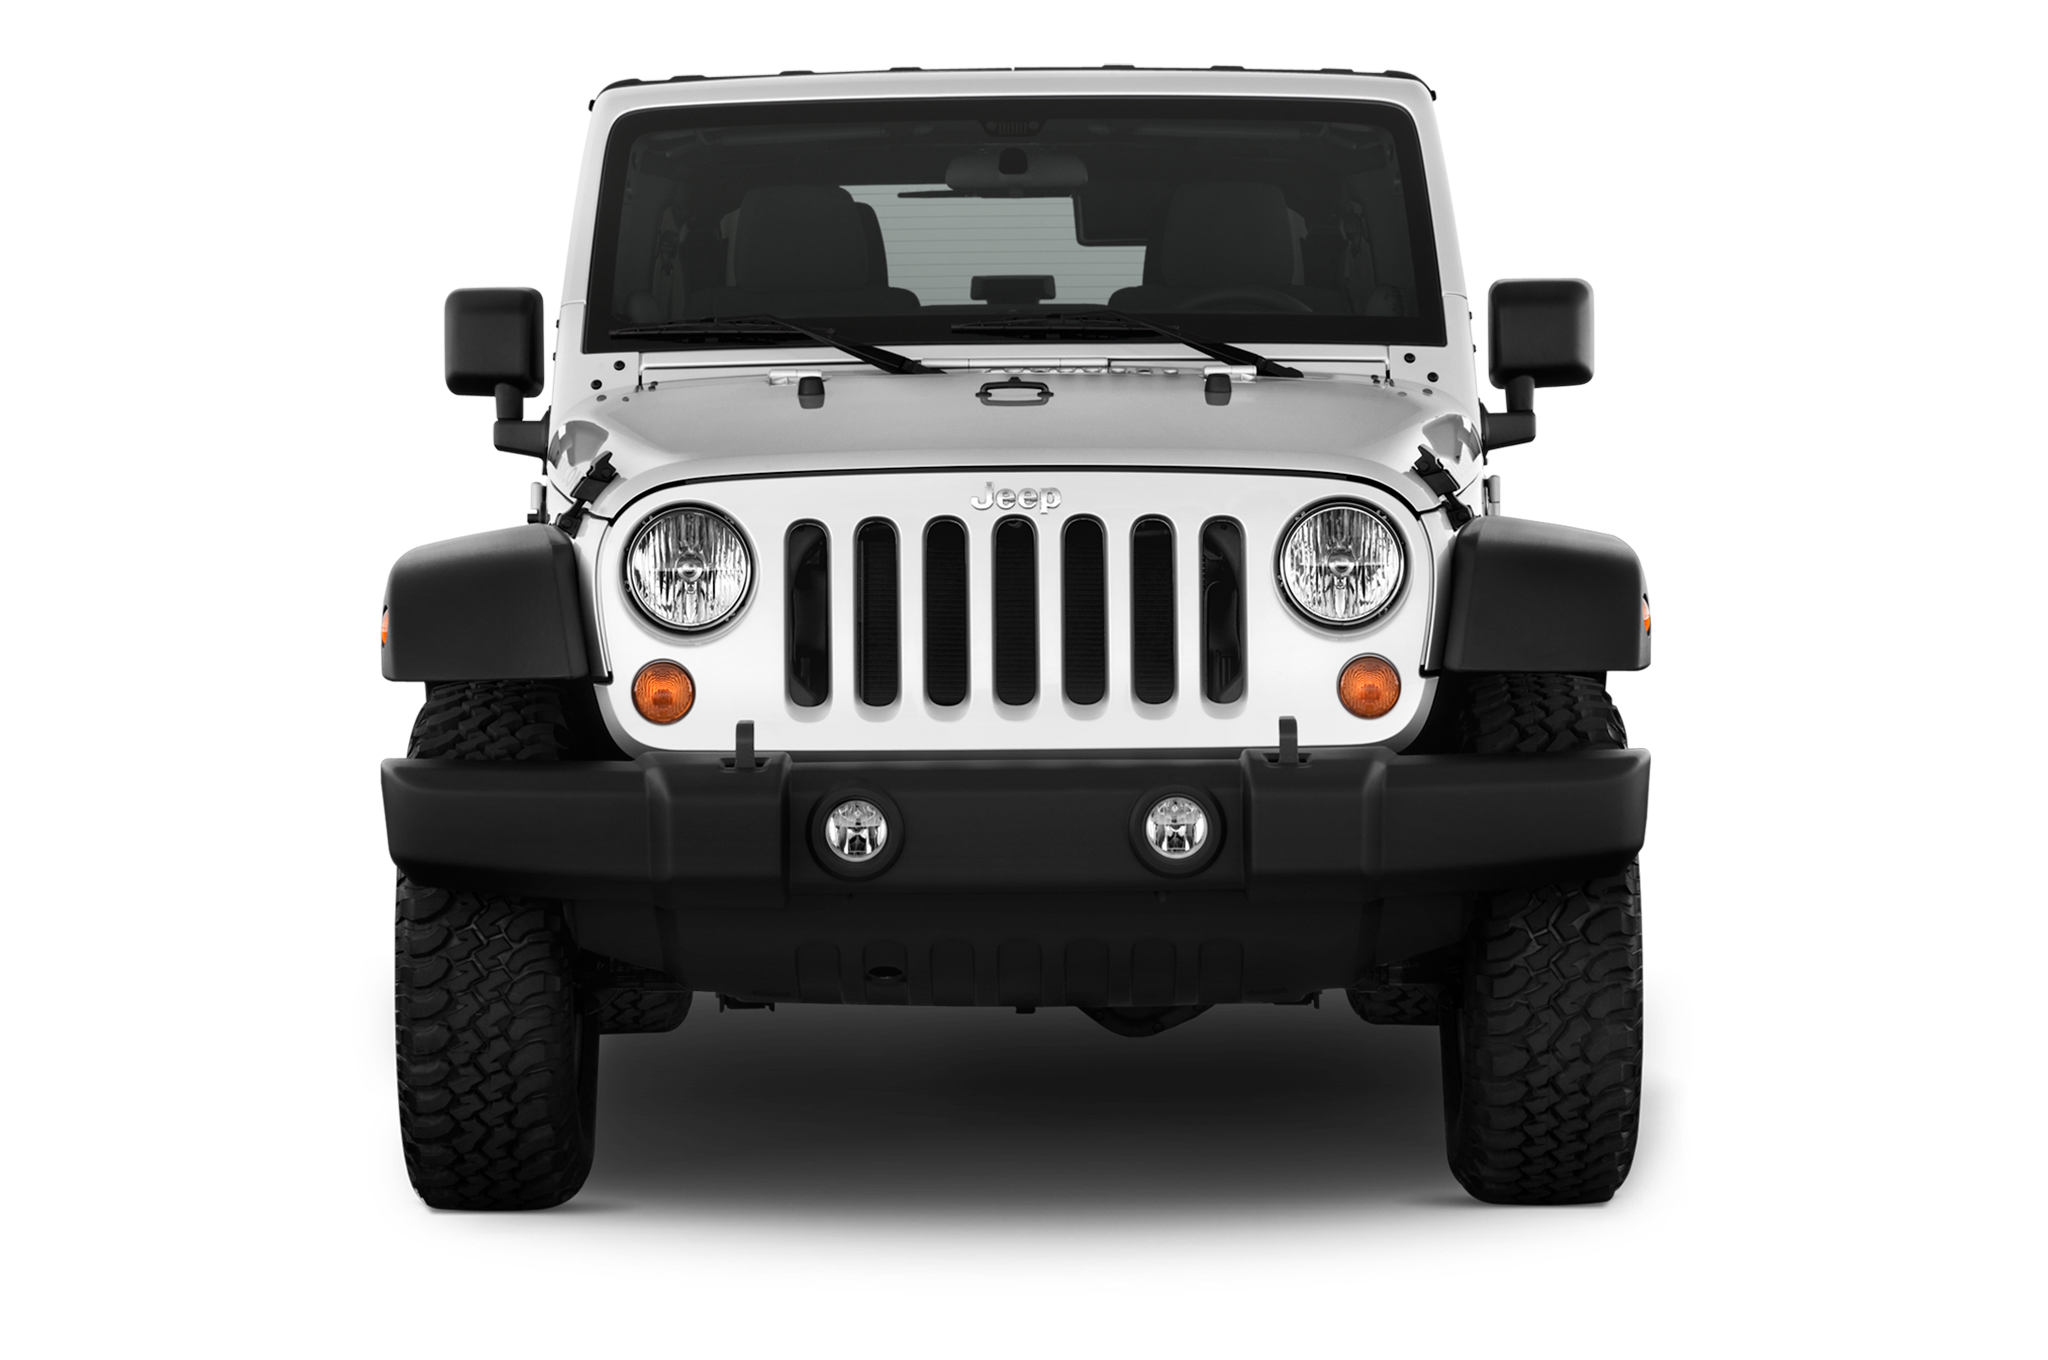 Jeep Wrangler Silhouette #1495552 (License: Personal Use) .